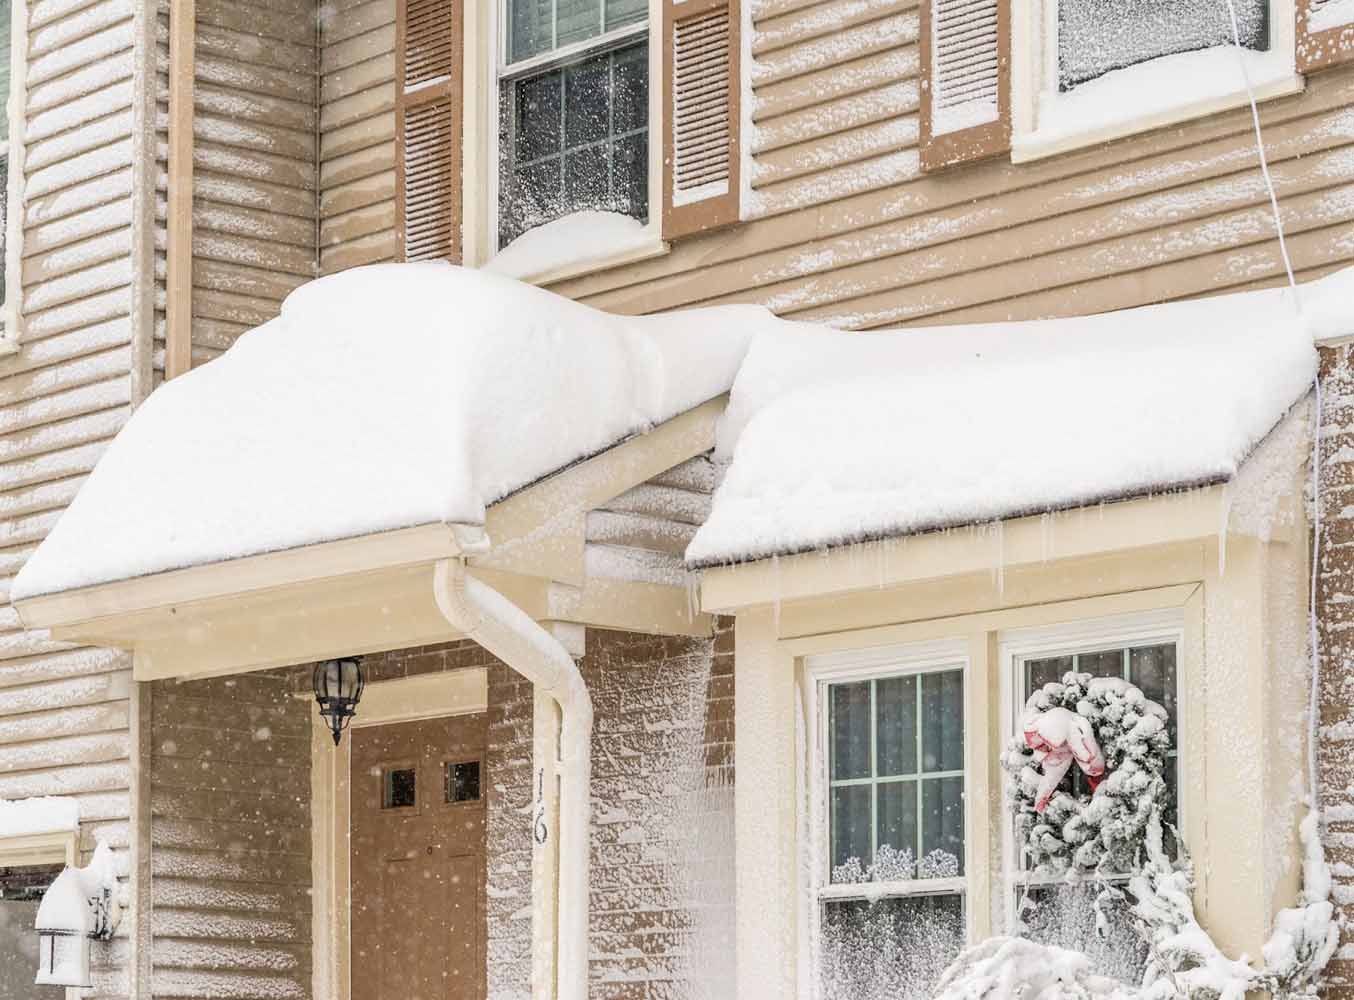 A large amount of snow on the roof of a tan home during a snowstorm